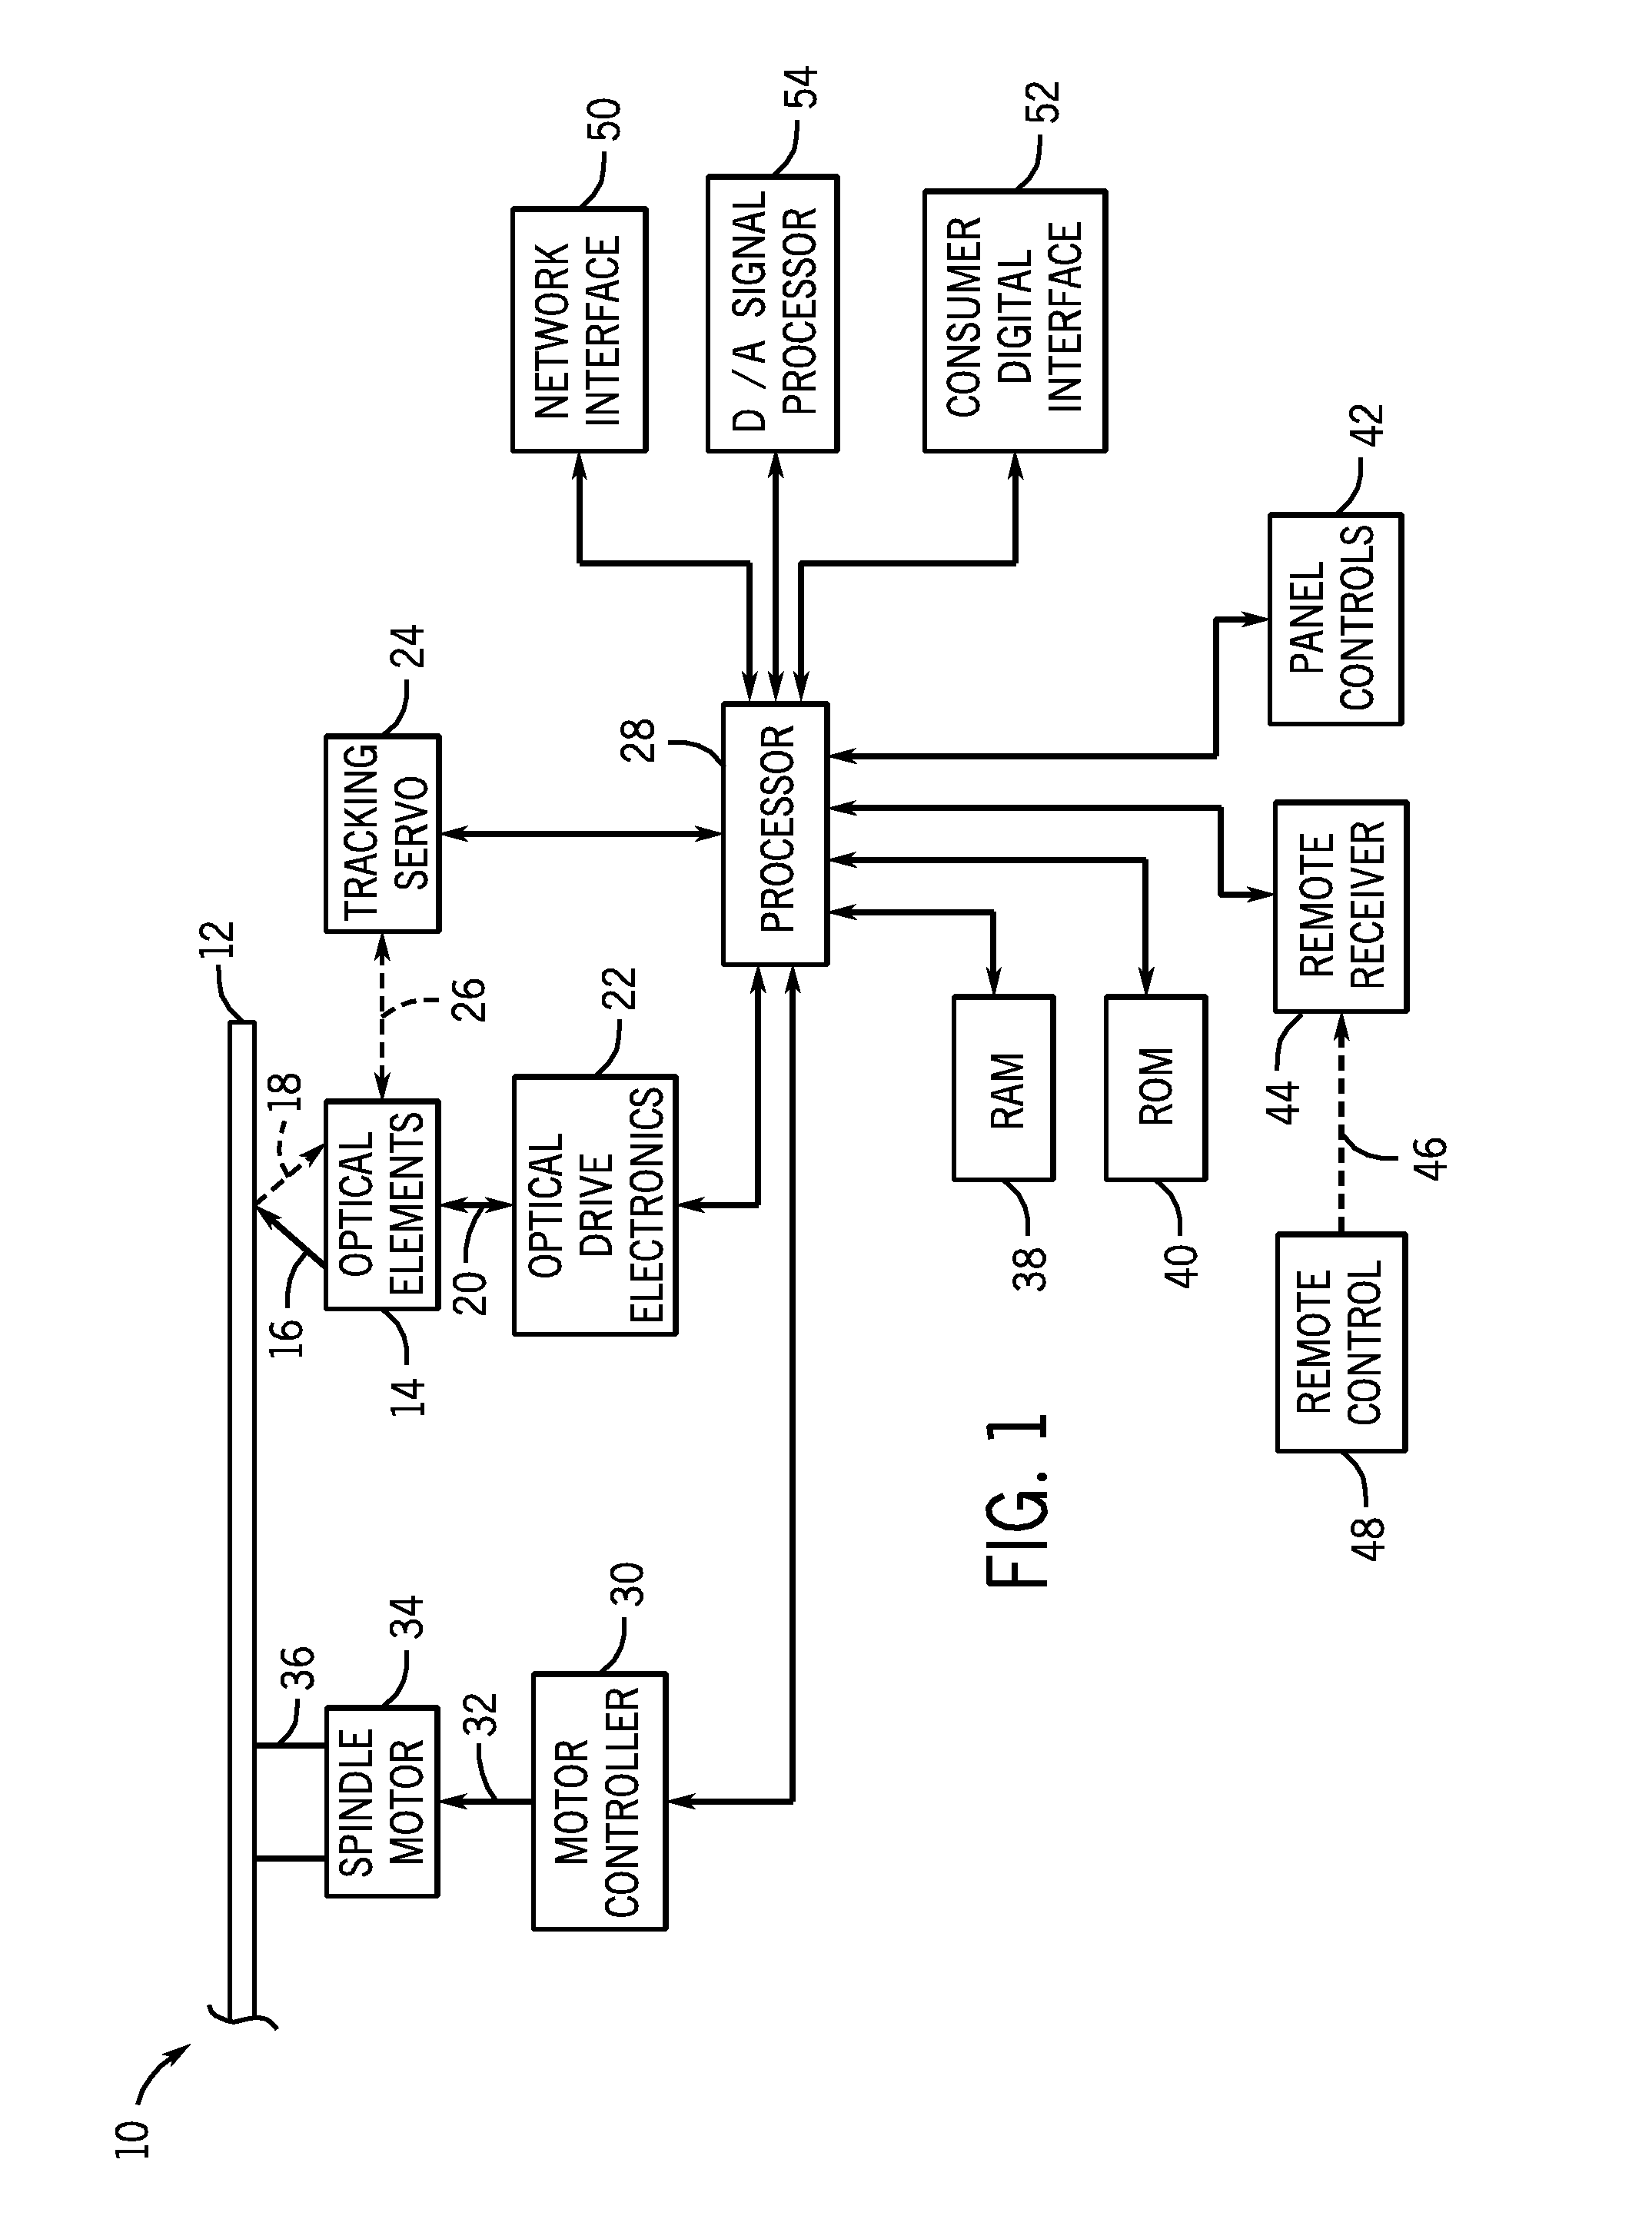 System and method for controlling tracking in an optical drive